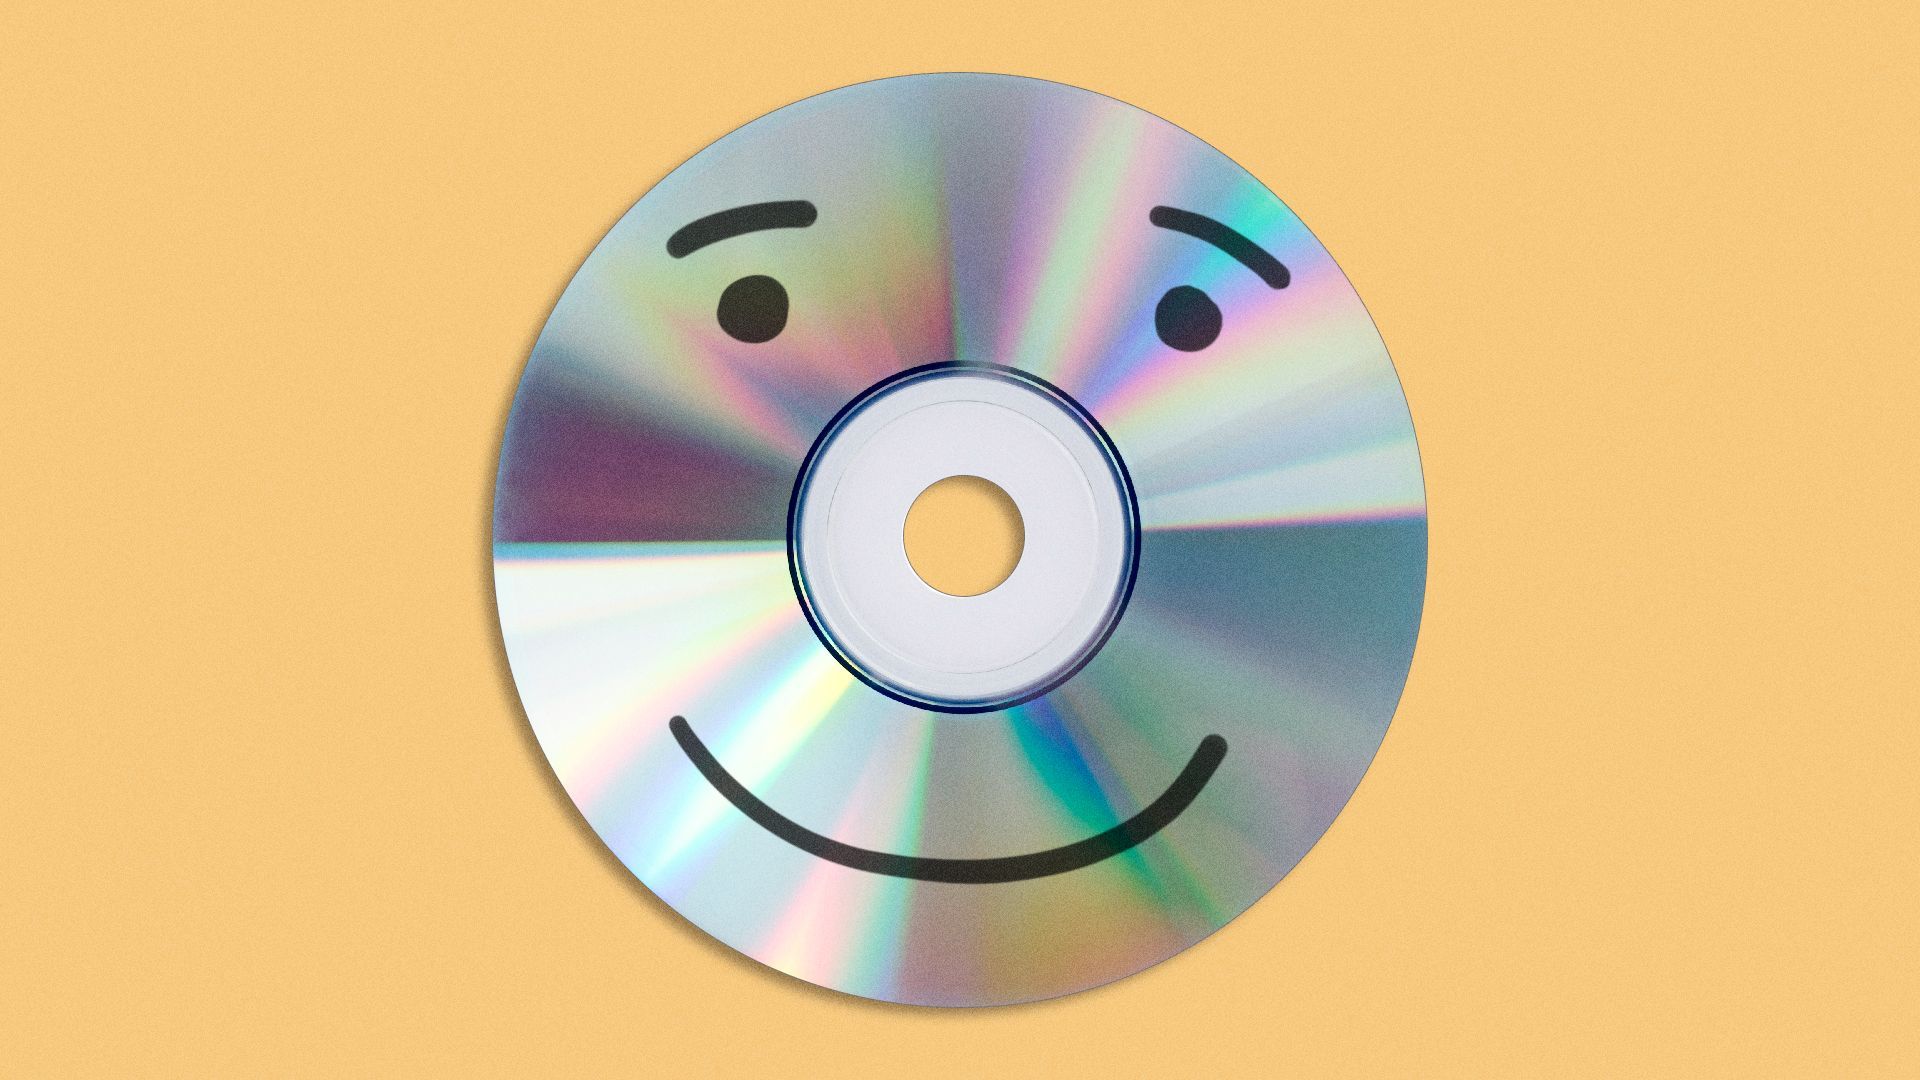 Illustration of a CD with a smiley face drawn on it.